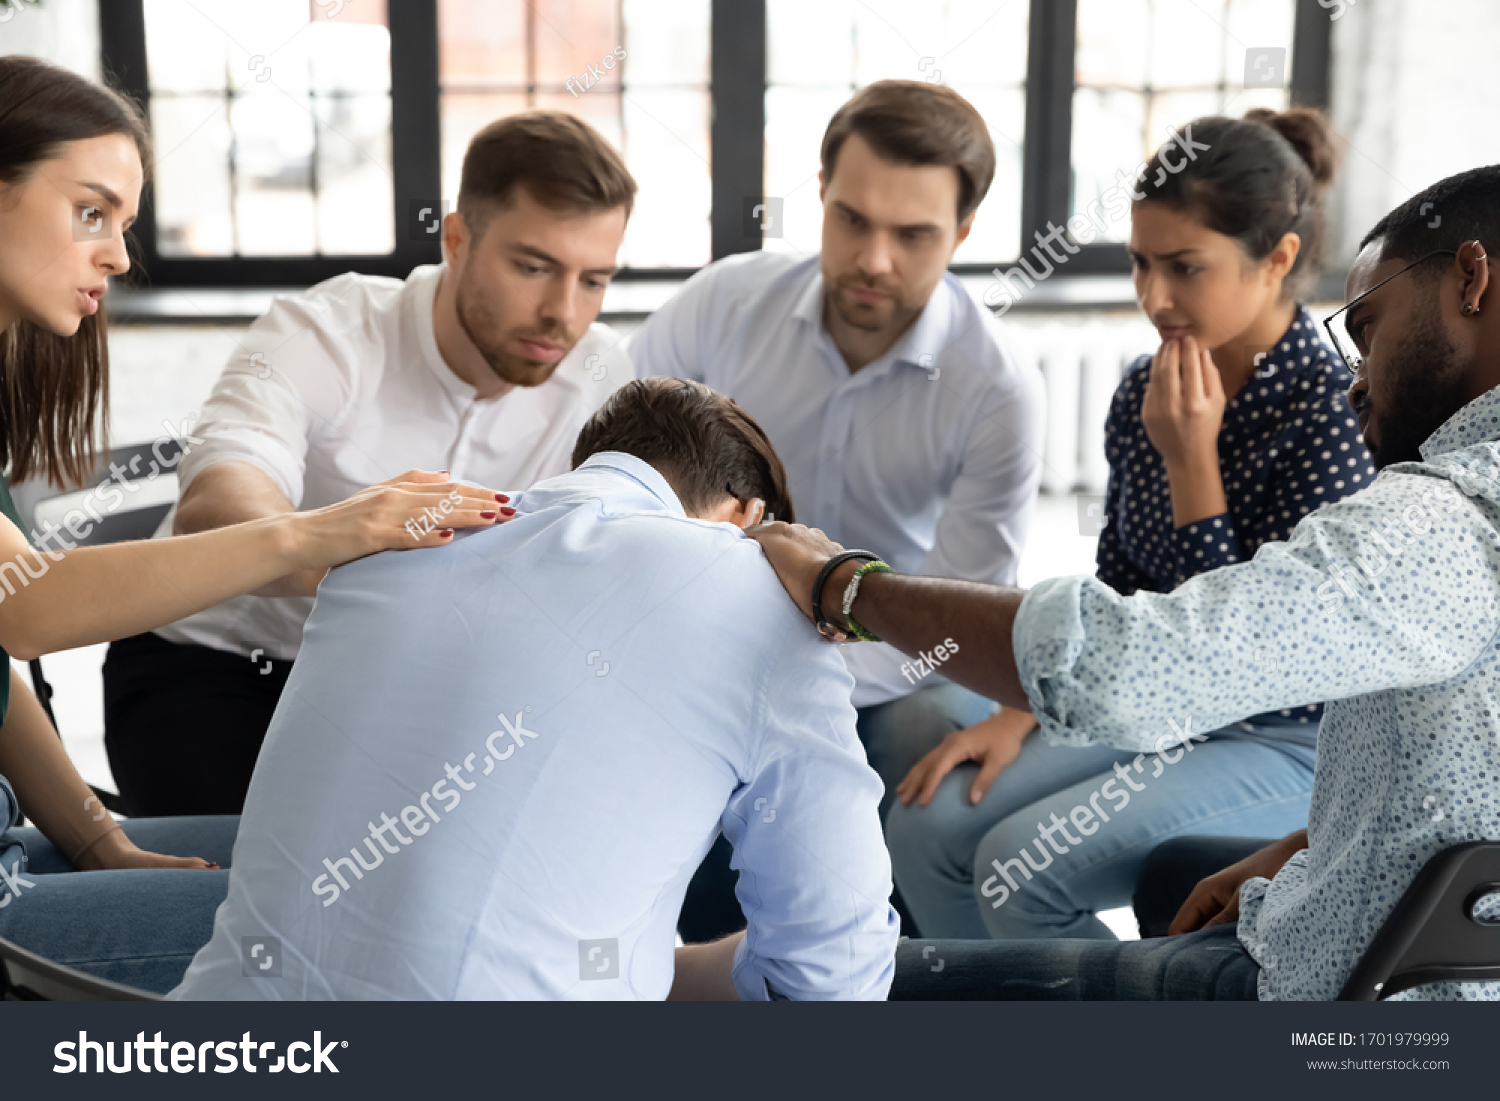 Multiethnic young people sit in circle participate in group psychological therapy together, diverse patients hug support comfort upset man patient at team counseling session, depression concept #1701979999